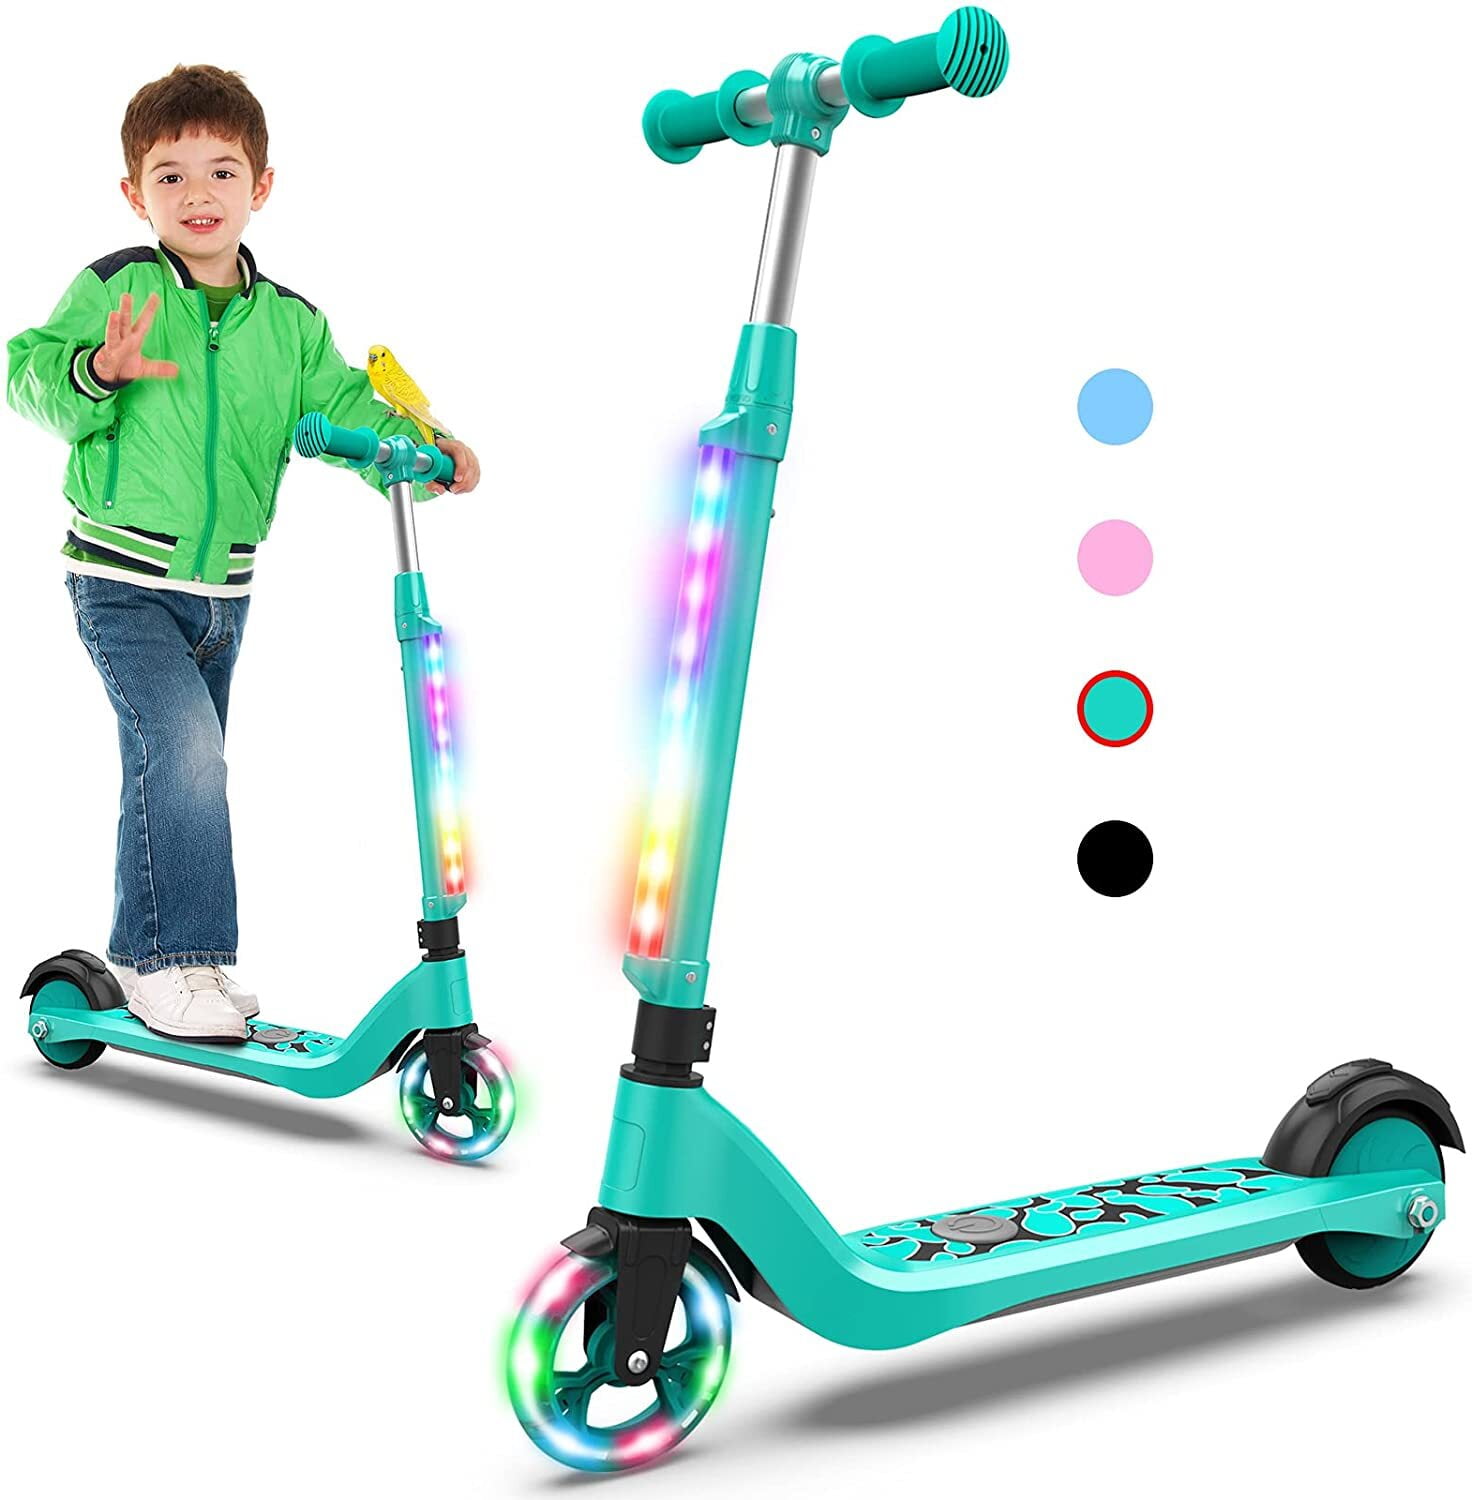 Lieagle Electric Scooter for Kids Ages 6-12 Lightweight and Adjustable Handlebar with Flashing Rainbow Lights Glow PU Wheel Yd531 Blue, Size: Yd531 (